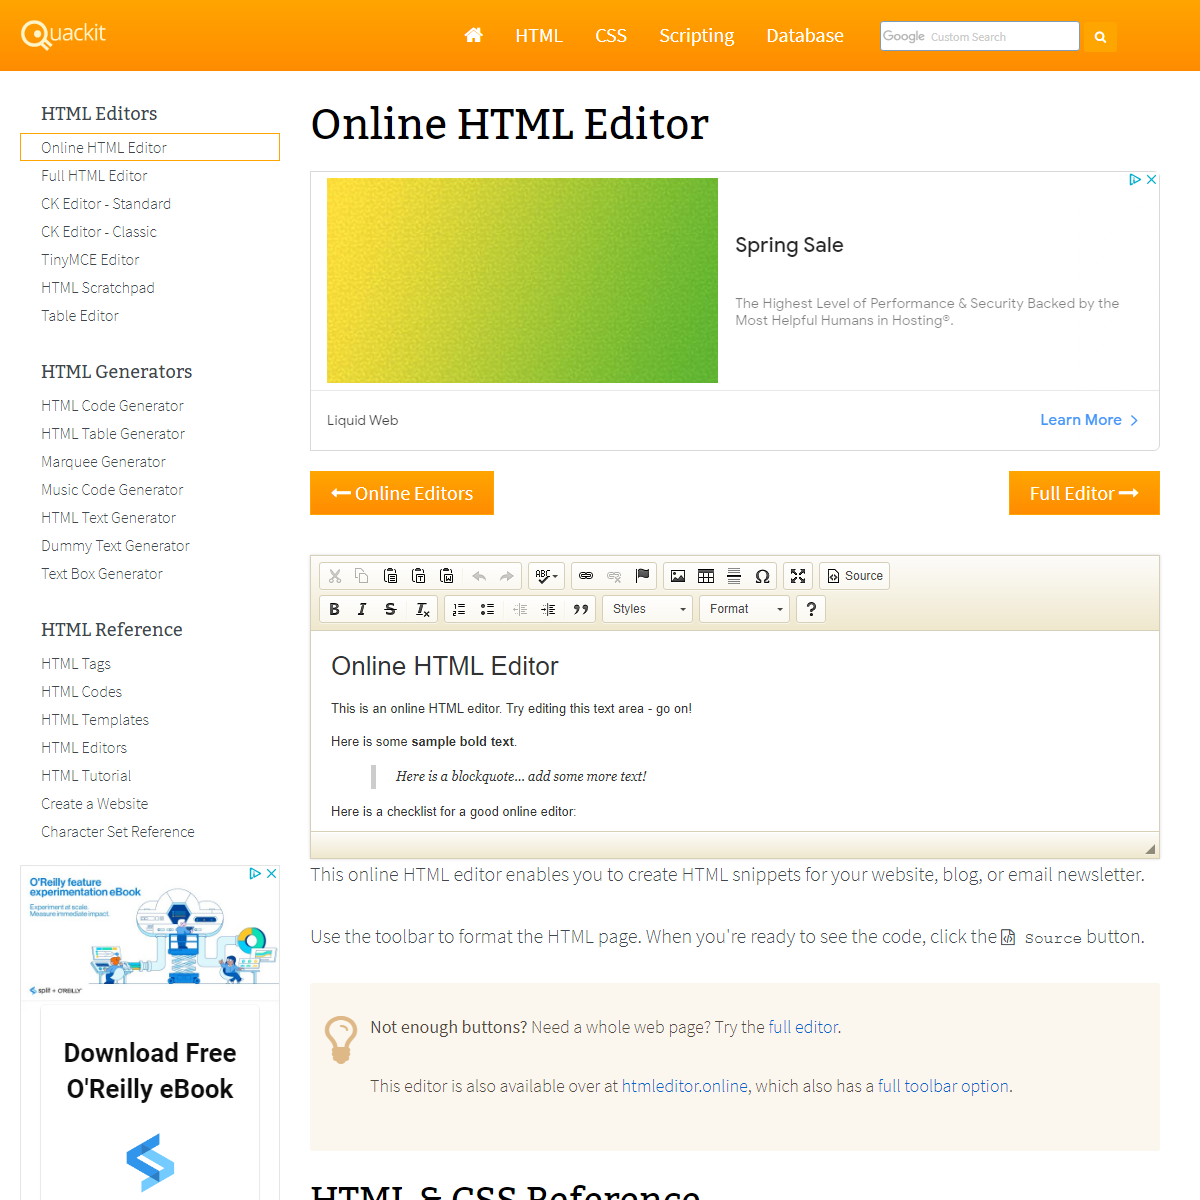 A complete backup of https://www.quackit.com/html/online-html-editor/